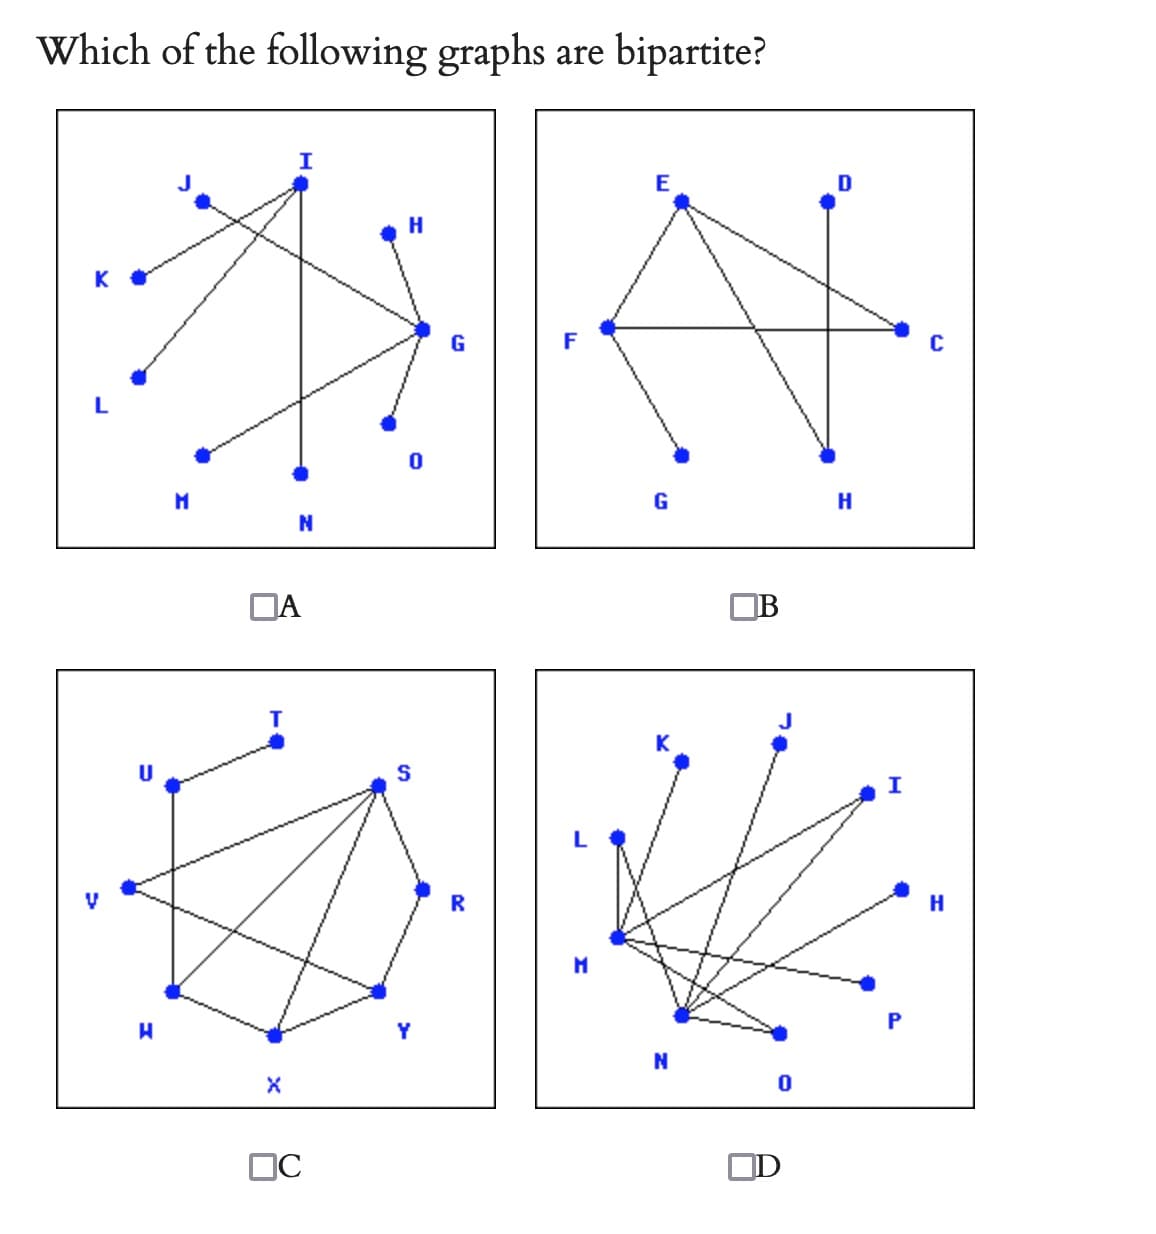 Which of the following graphs are bipartite?
I
E
H
0
H
M
N
☐A
X
Пс
Y
R
F
M
K
N
0
D
I
P
H